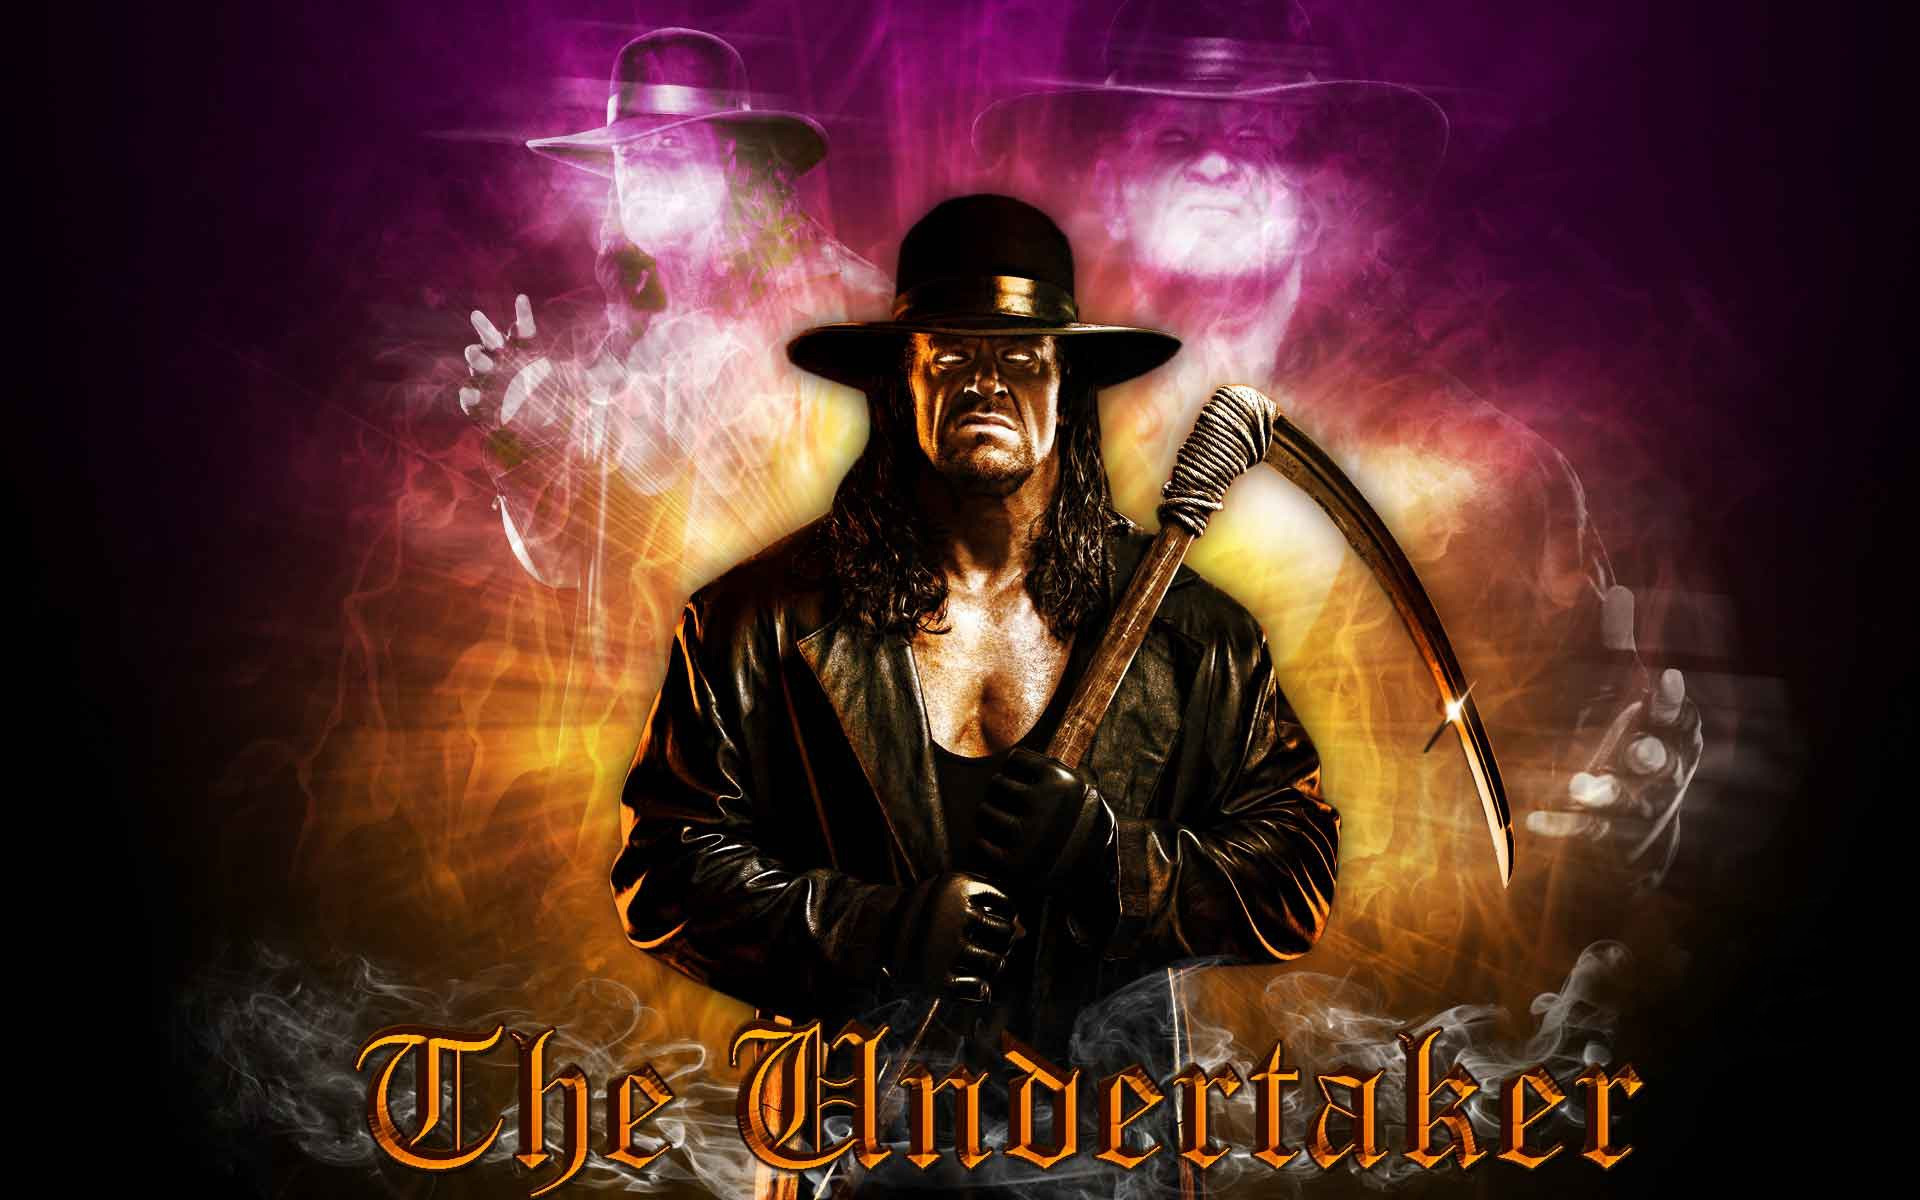 The Man from the Darkside, The Dead Man, The Phenom, The Undertaker!